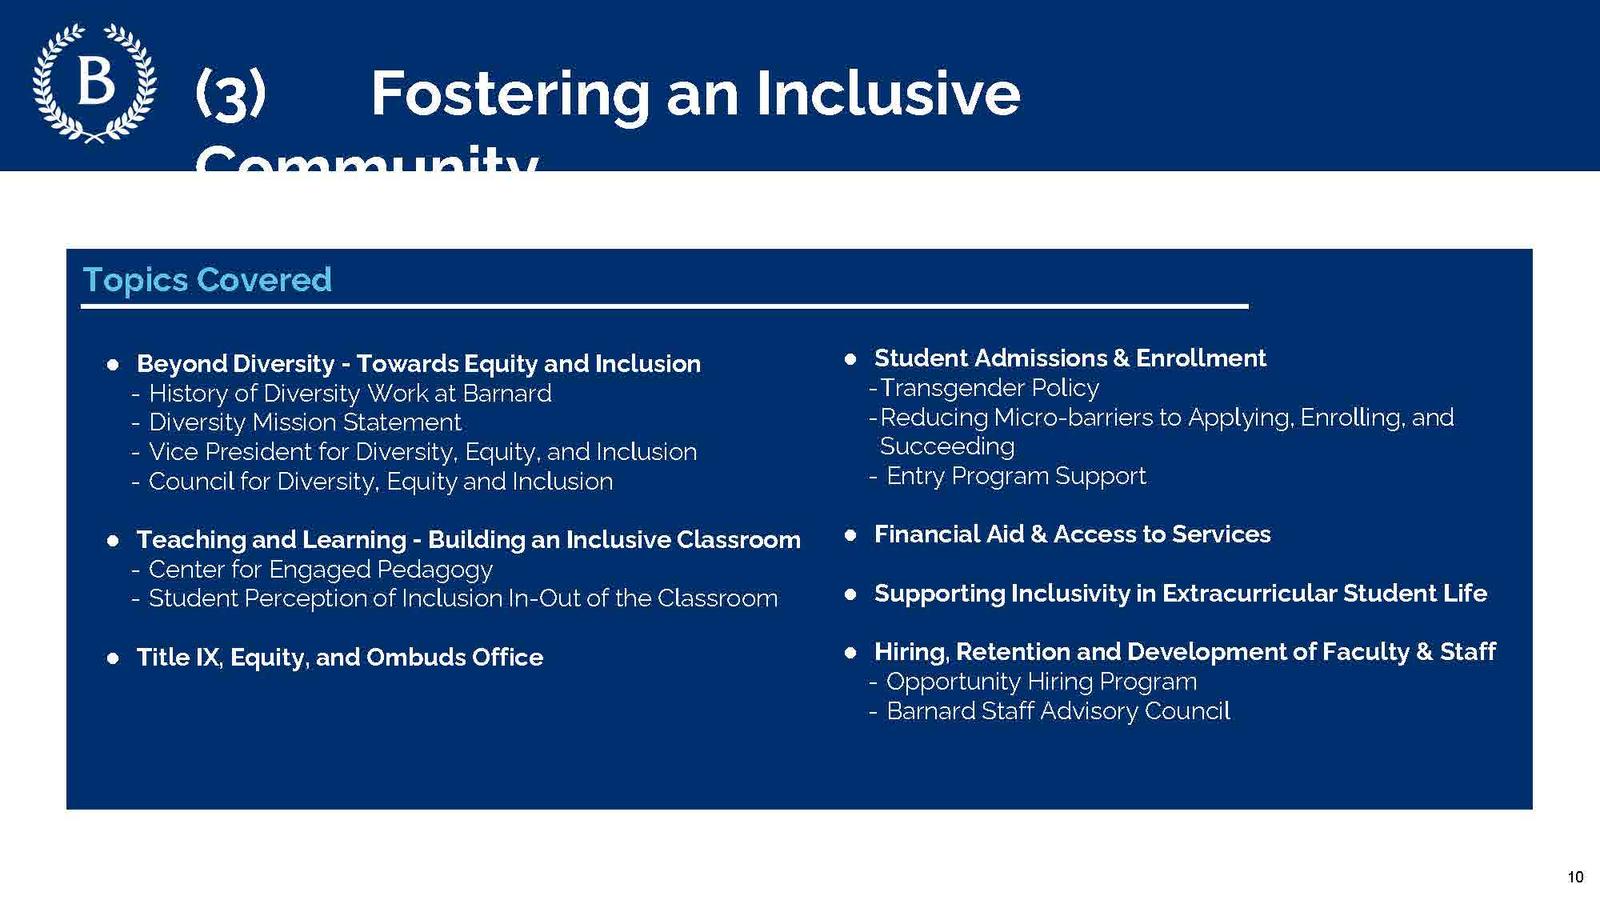 WG 3 Fostering an Inclusive Community